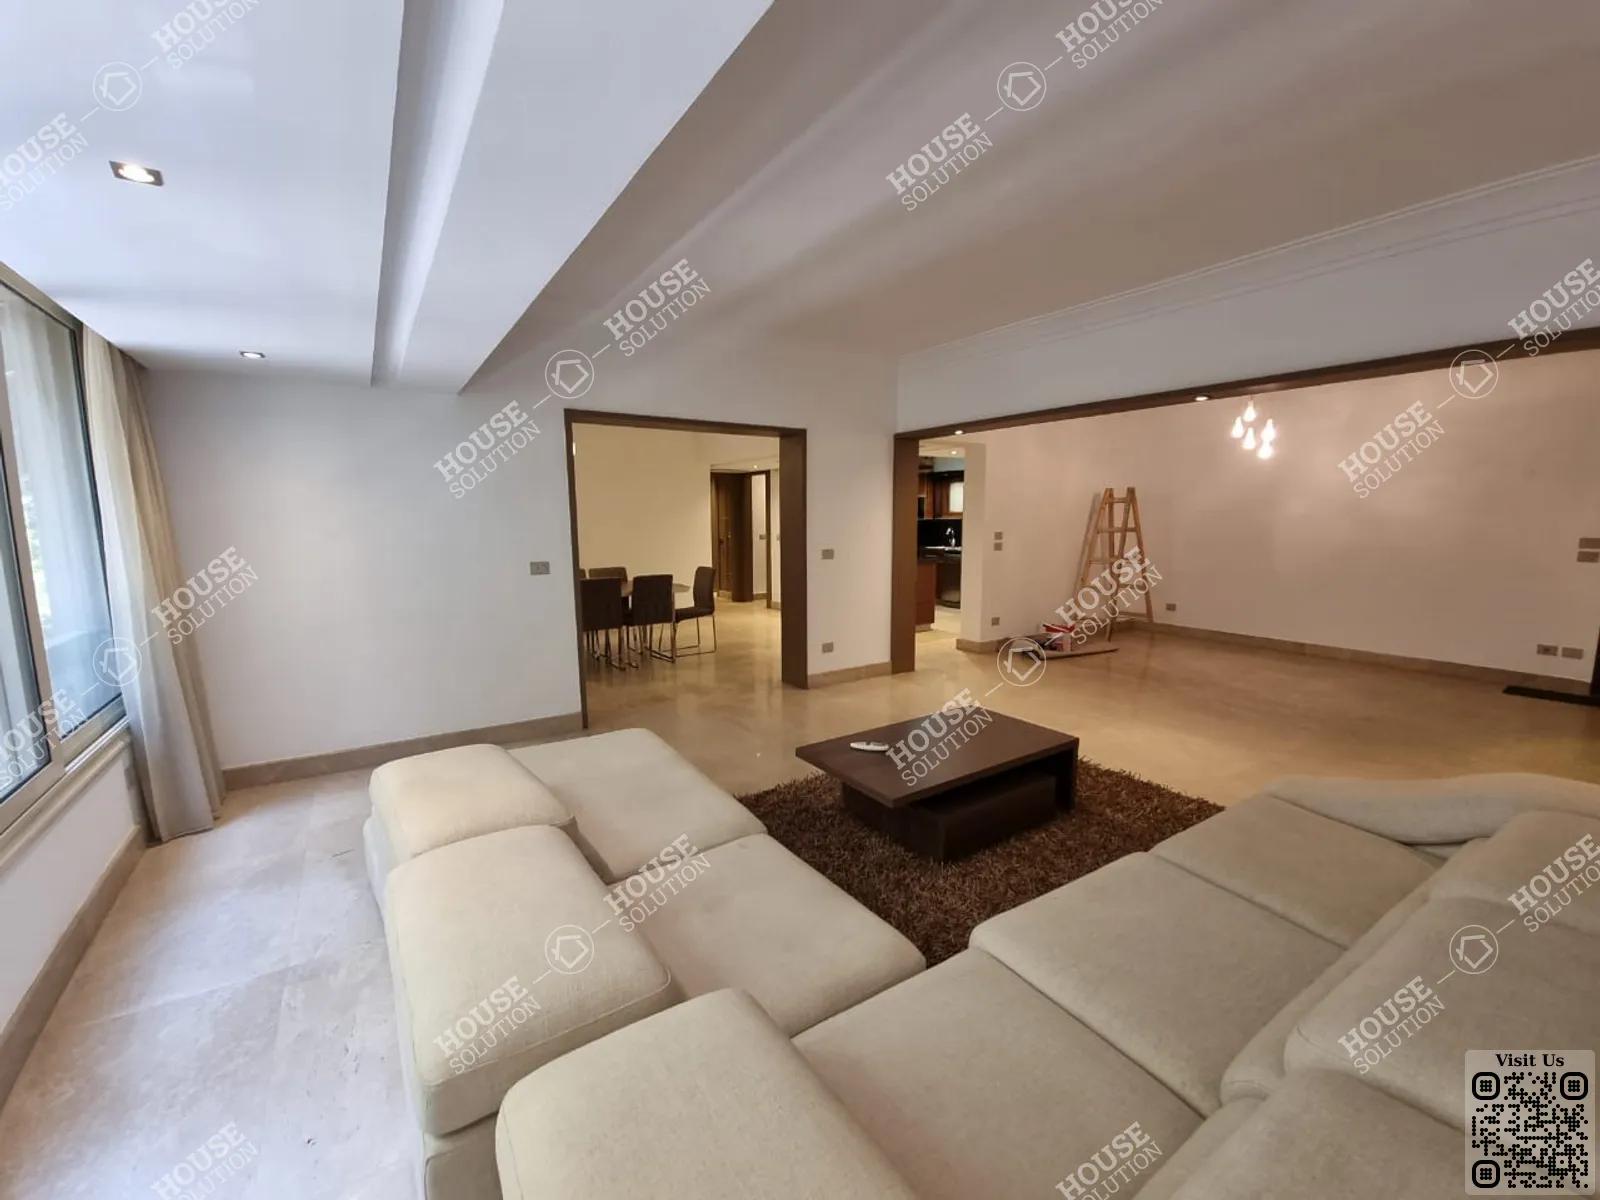 RECEPTION  @ Apartments For Rent In Maadi Maadi Sarayat Area: 220 m² consists of 3 Bedrooms 3 Bathrooms Modern furnished 5 stars #5537-2